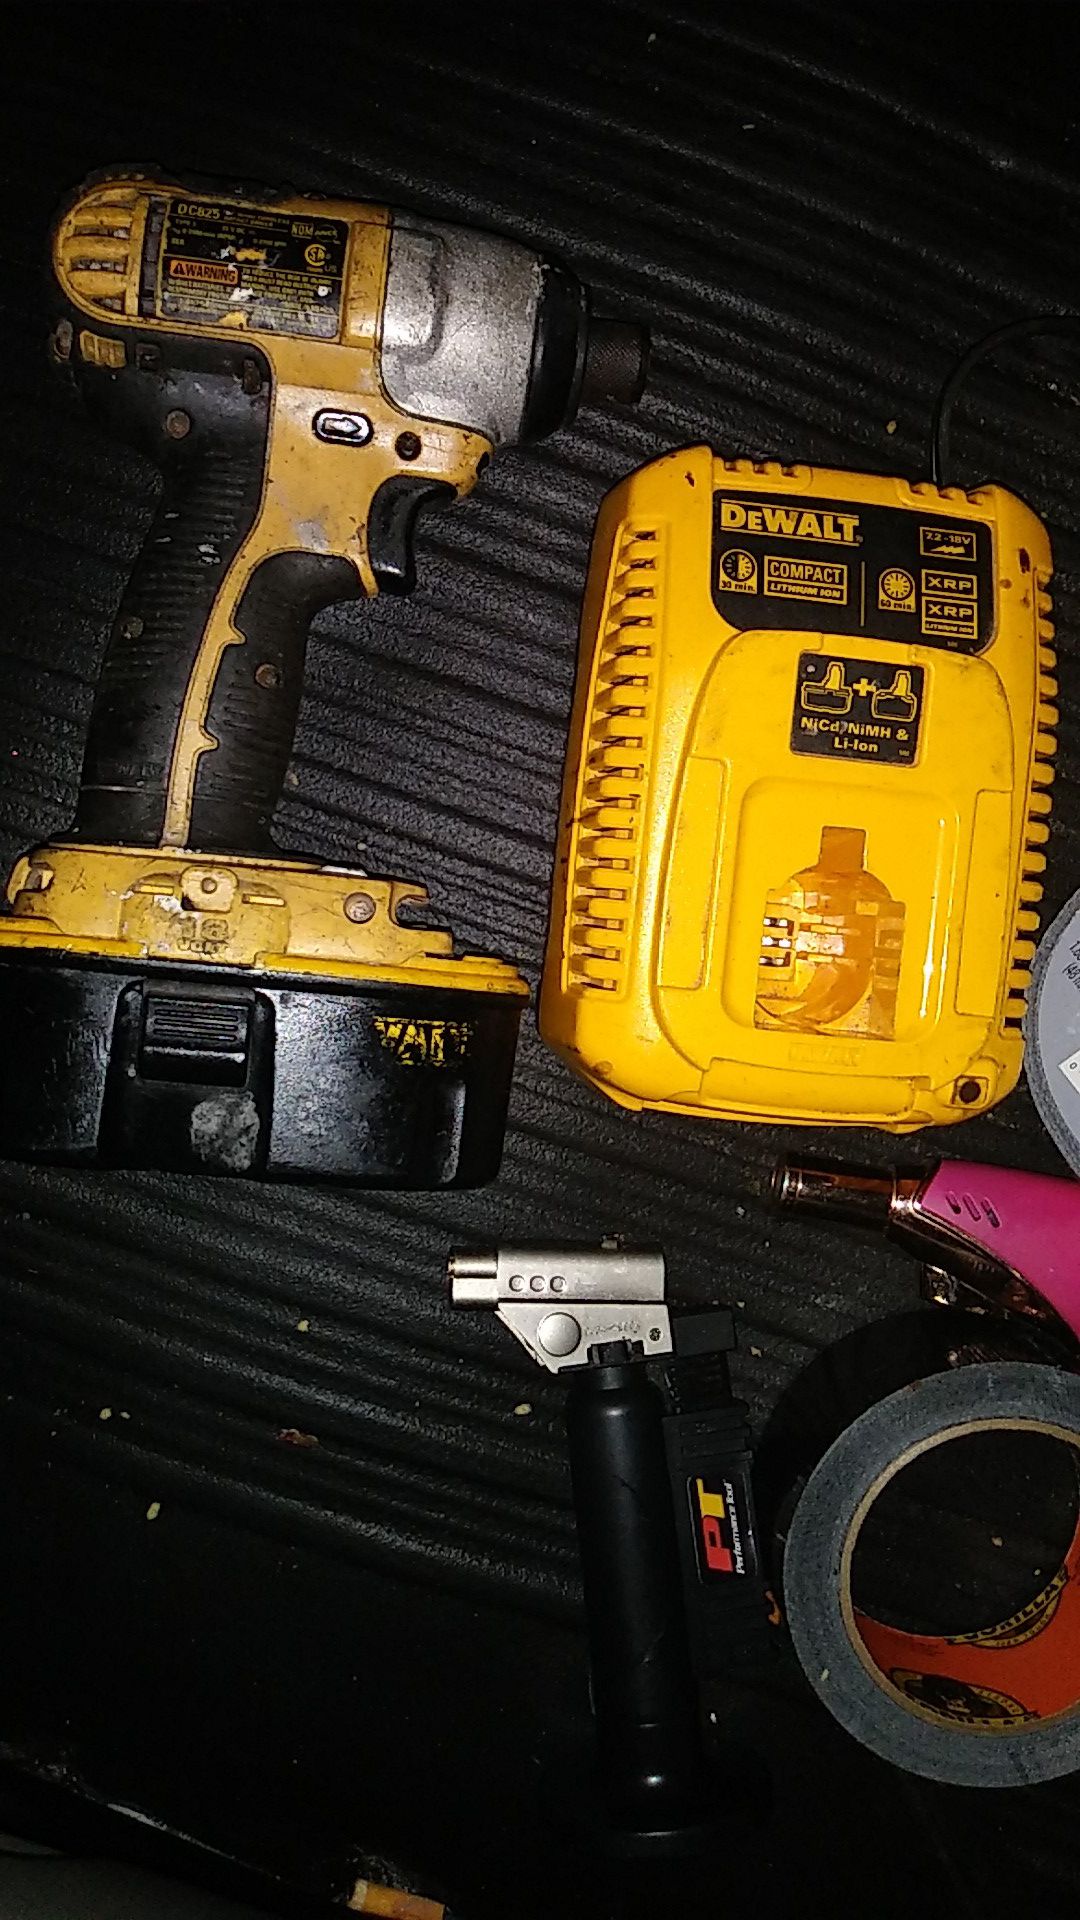 Dewalt 12v dc impact drill with battery charger